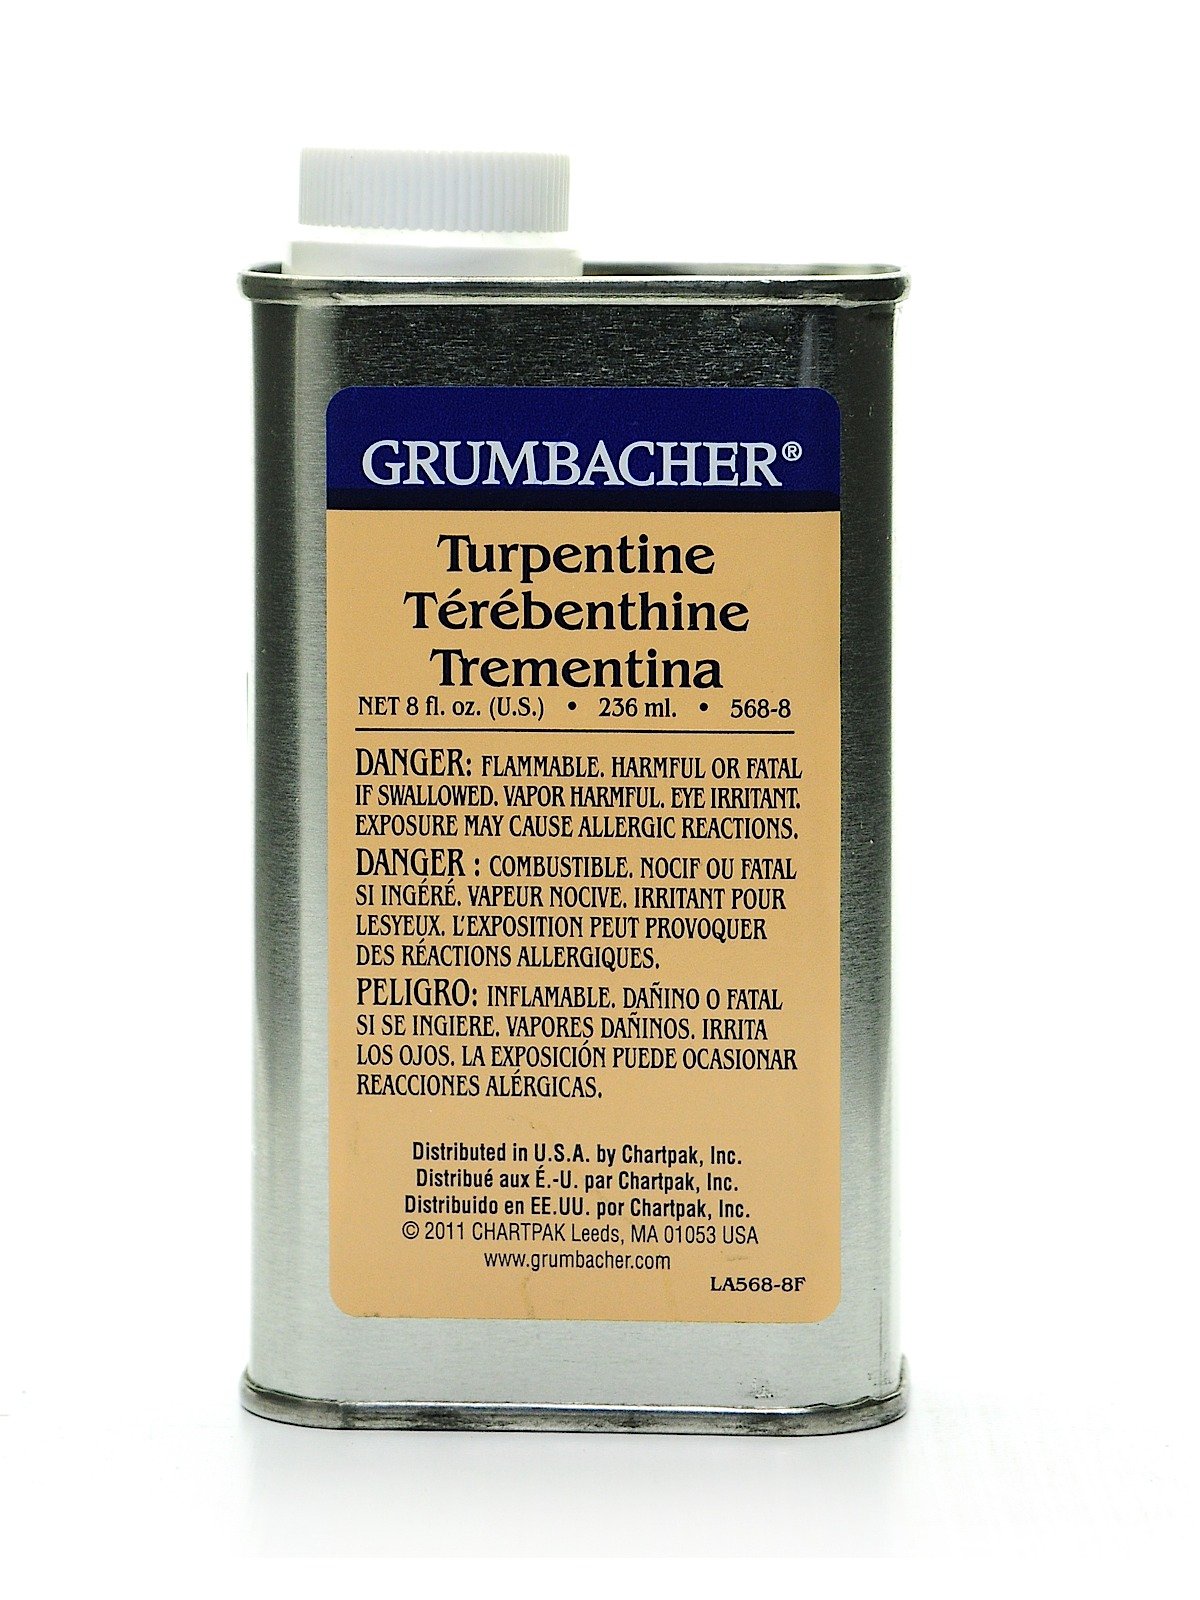 Turpentine for oil painting